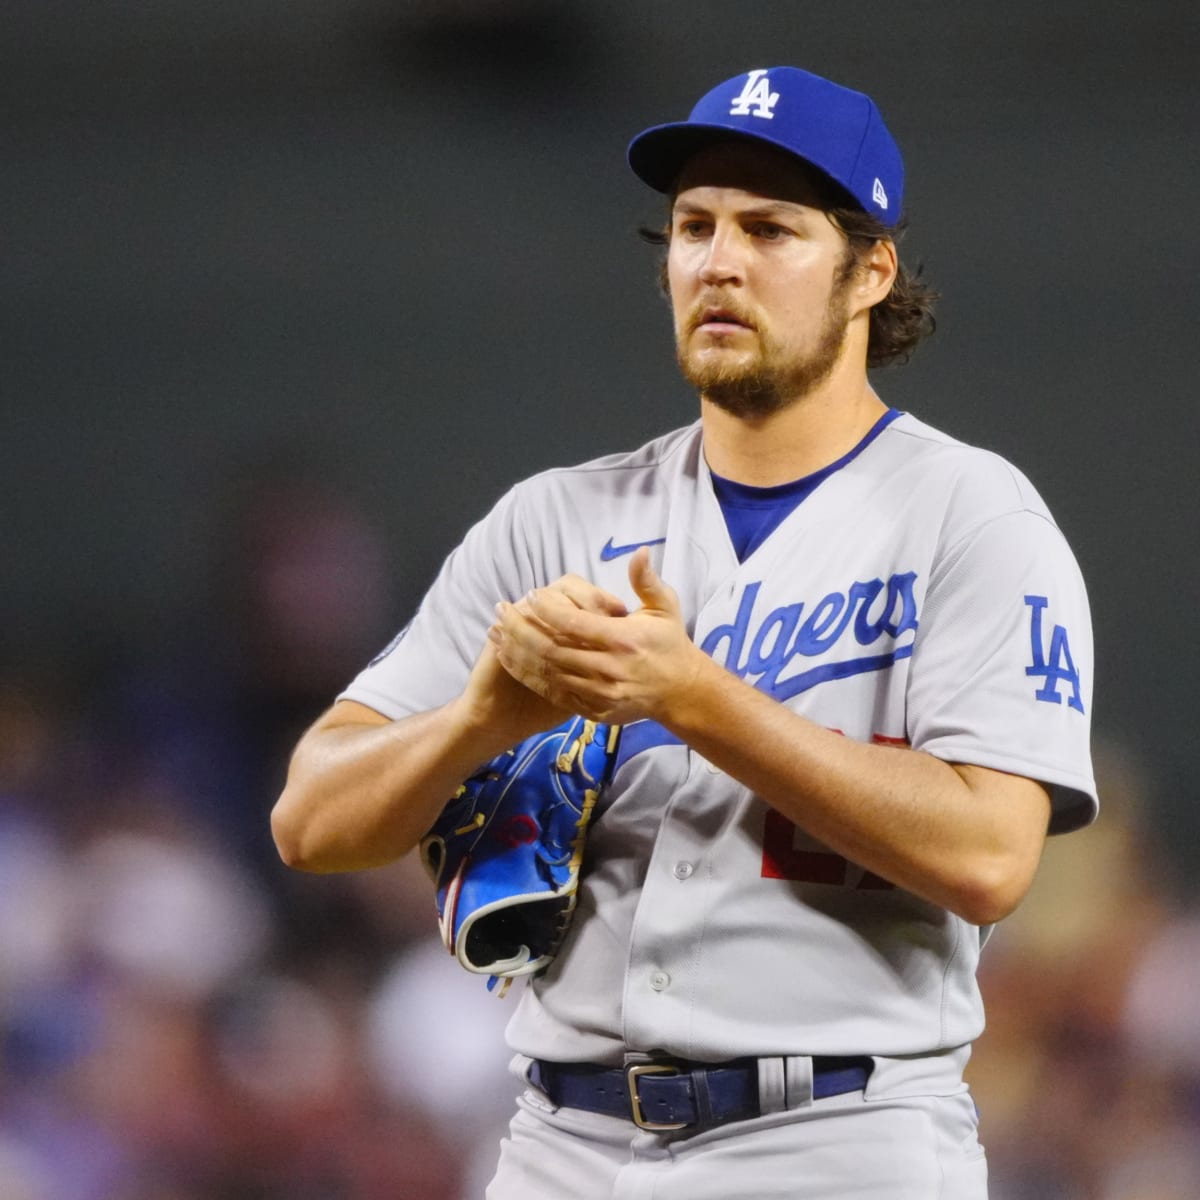 Dodgers pitcher Trevor Bauer has suspension reduced and is